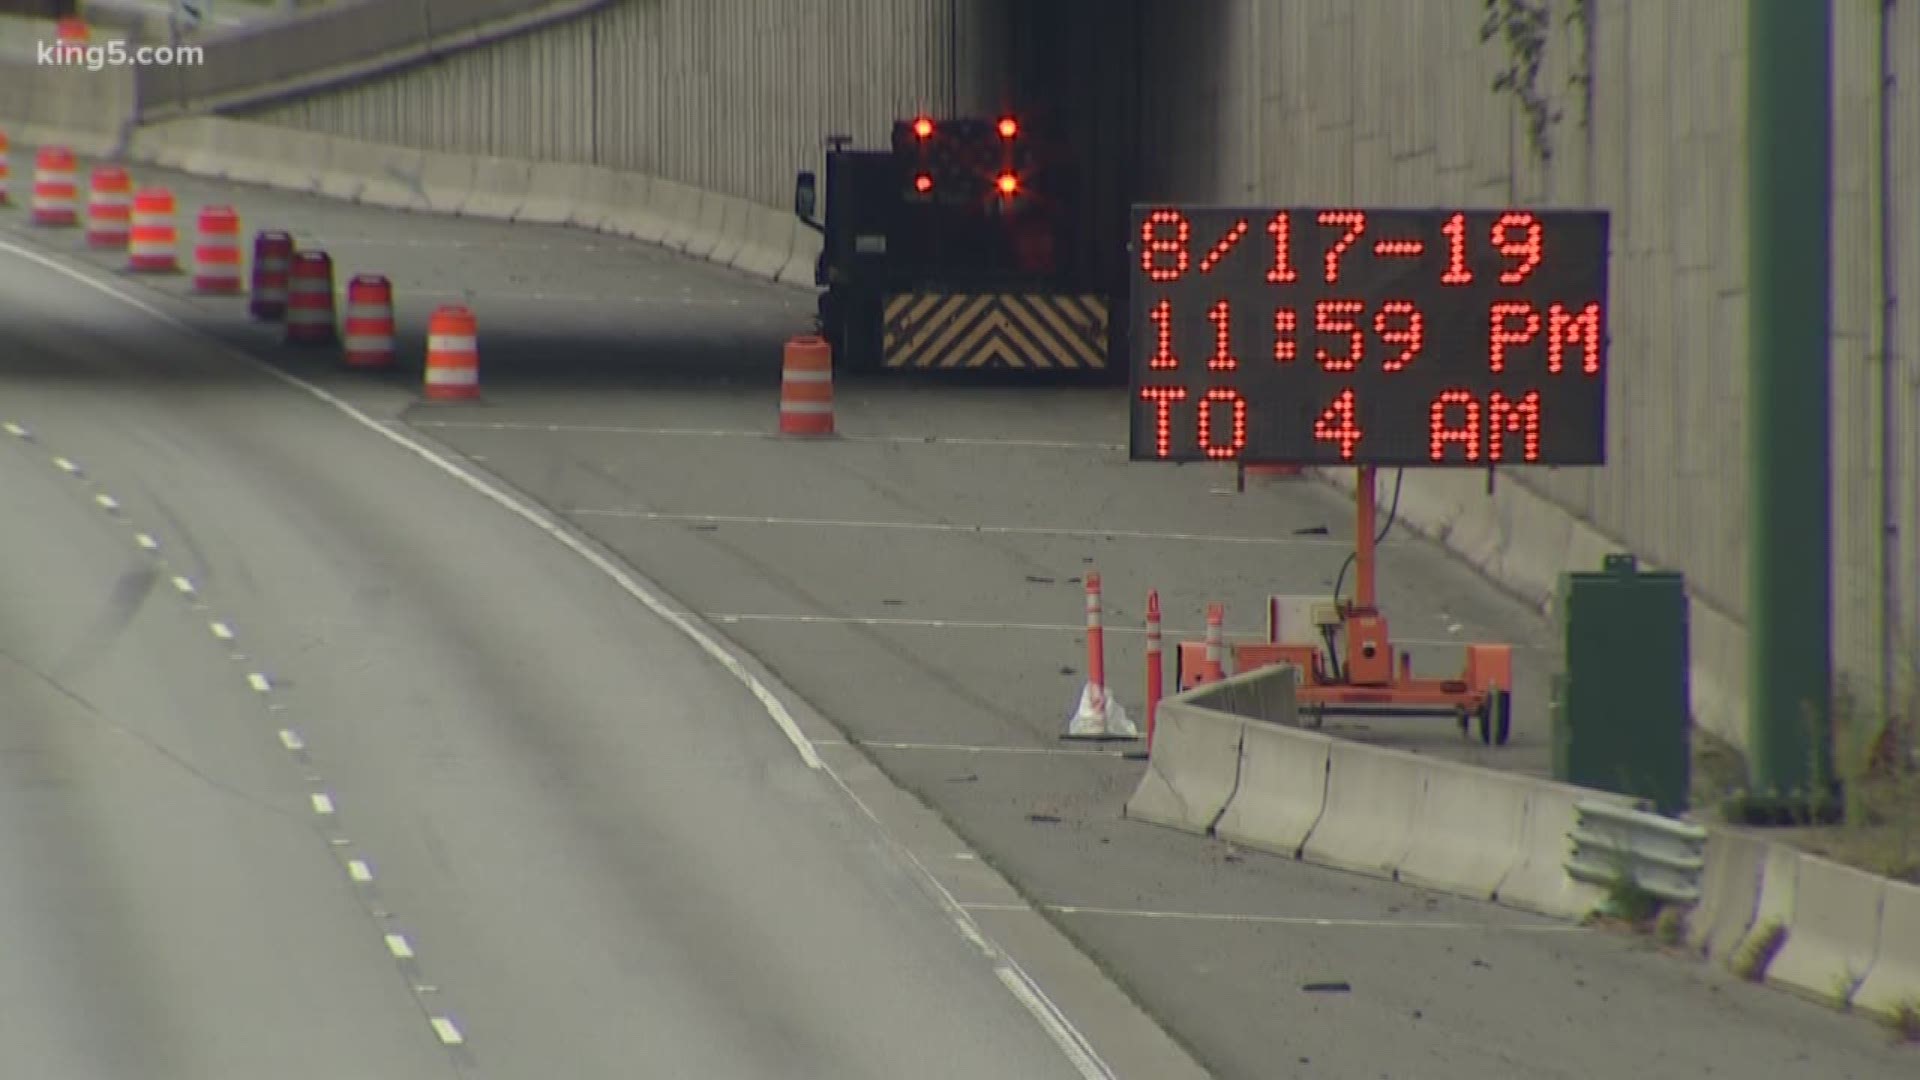 Road crews are working through the weekend to remove the temporary beams on I-405. Several northbound lanes will be closed overnight until Monday morning at 5 a.m. KING 5’s Tony Black reports.